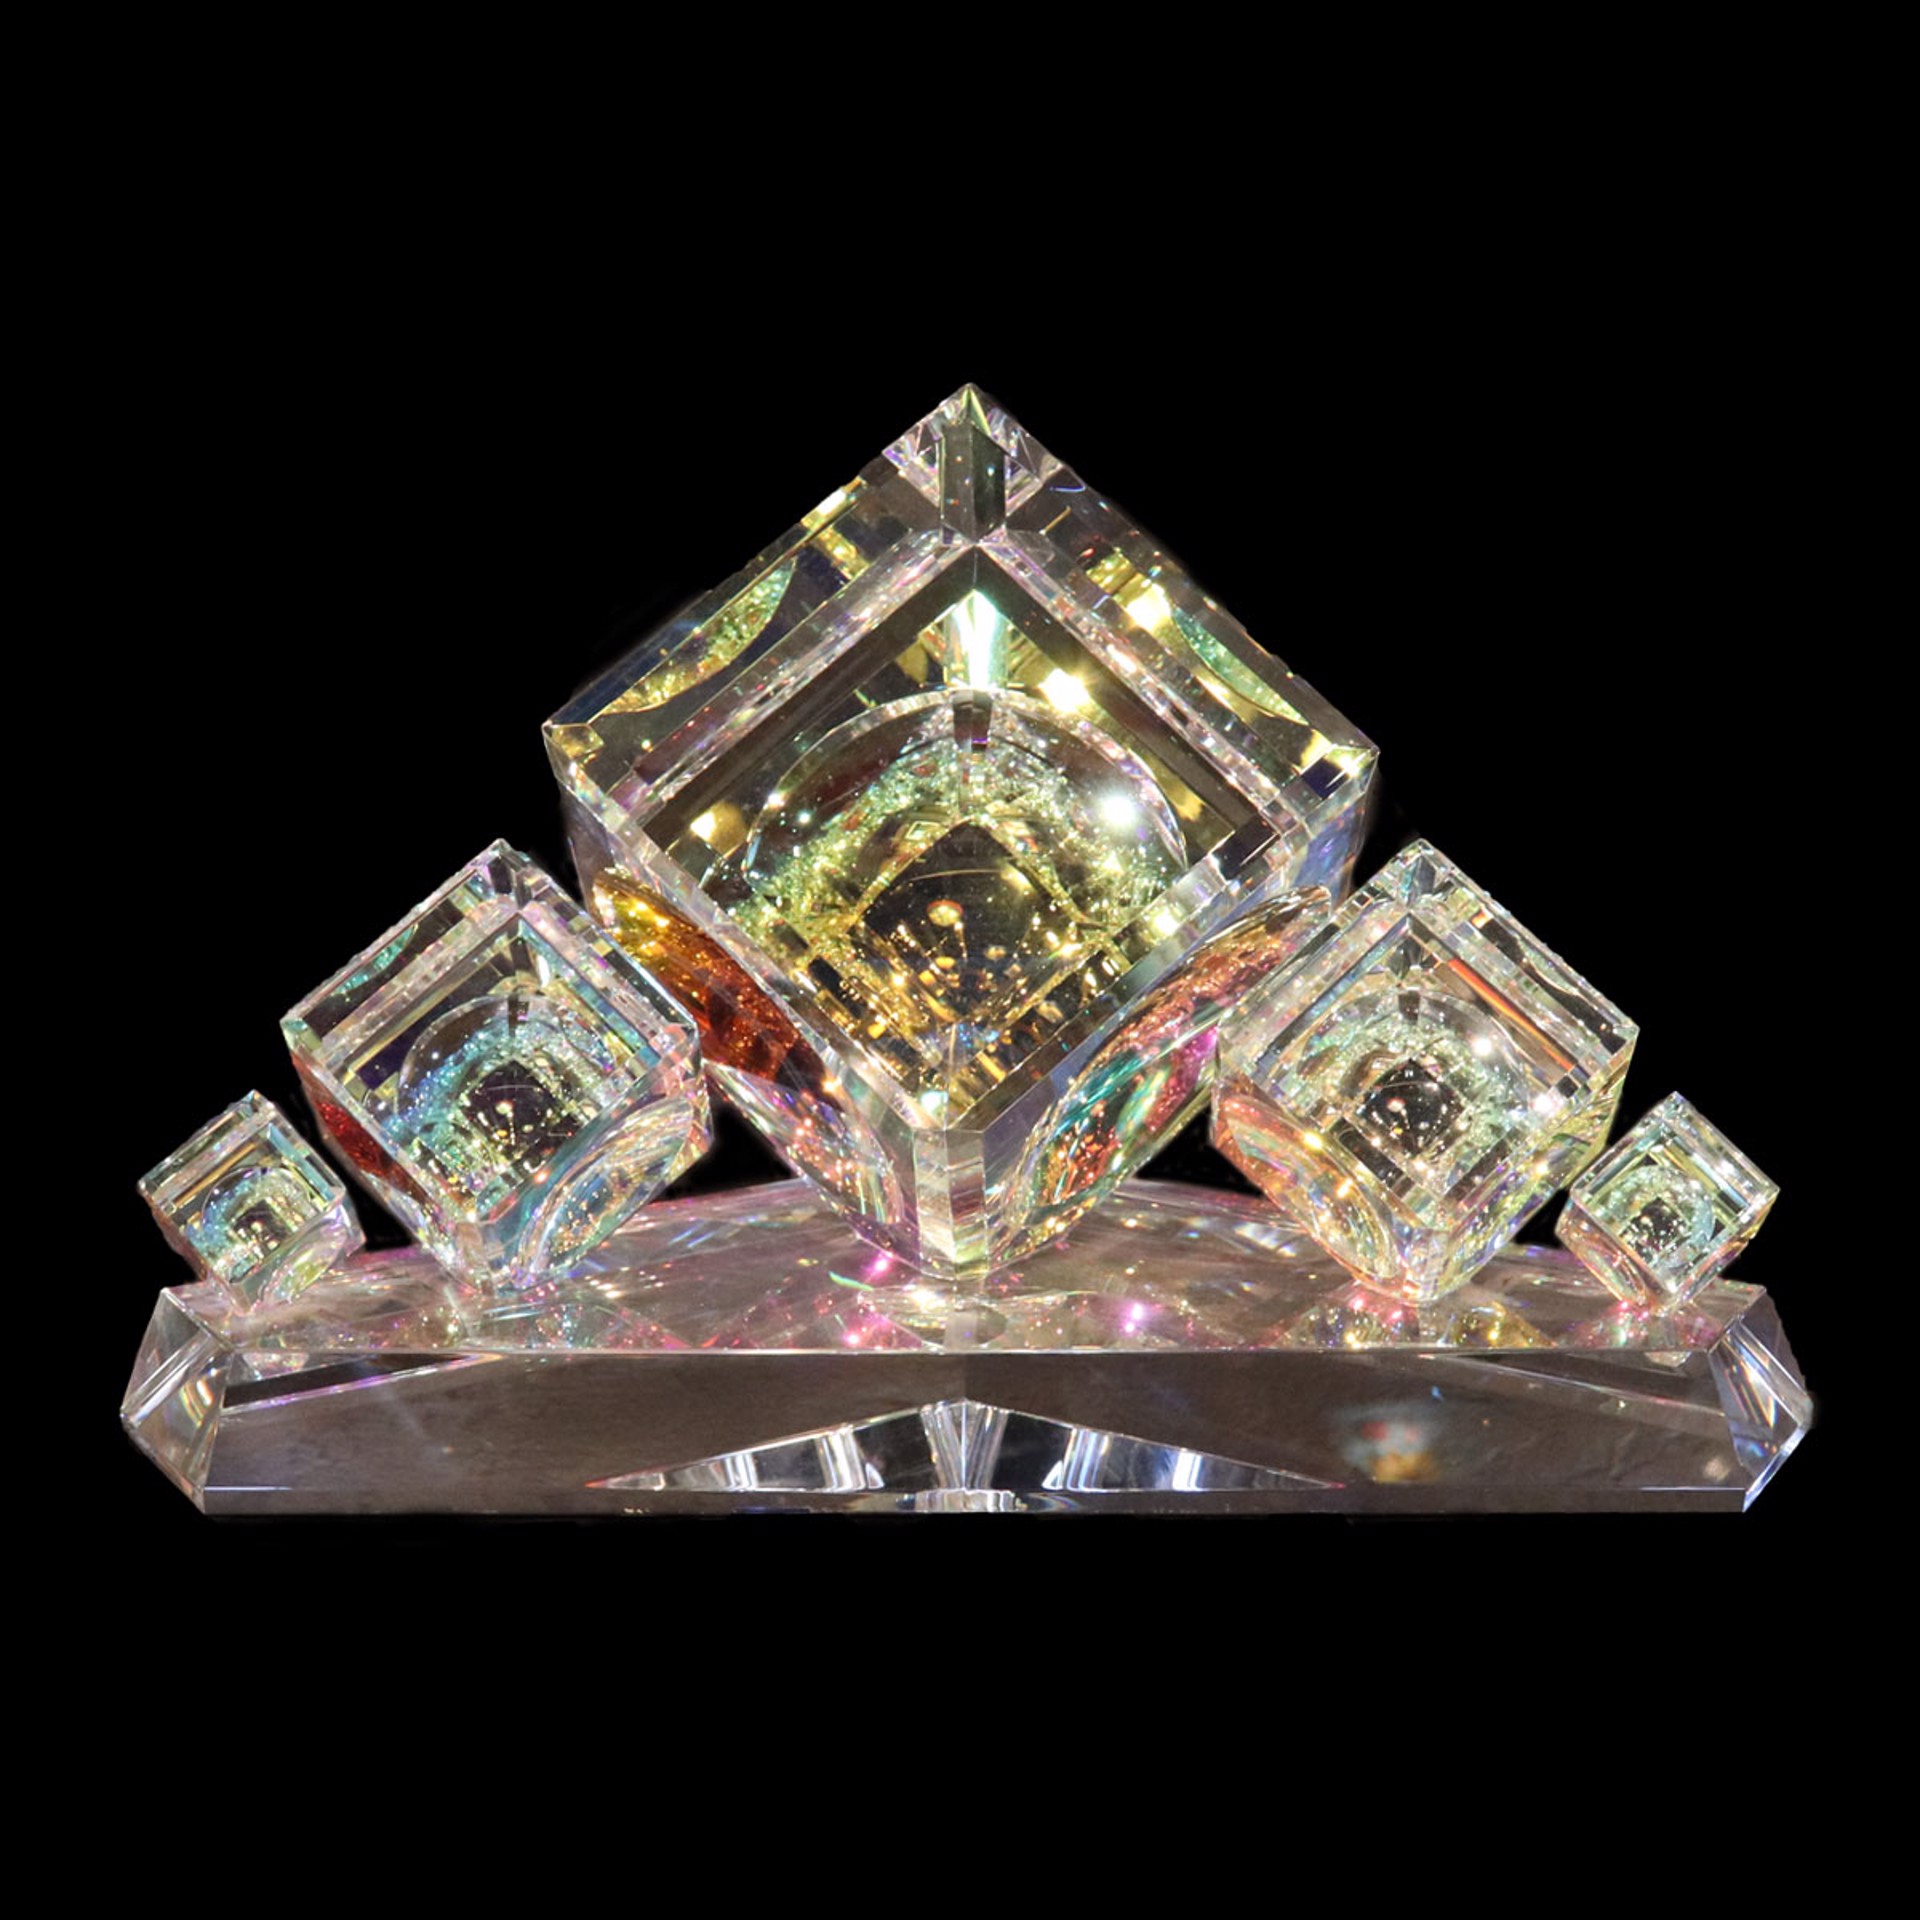 Crystal Cube Center Piece with Five  Stacked Cubes  30/60/120mm(1 1/8"2 3/8"4 3/4") by Harold Lustig